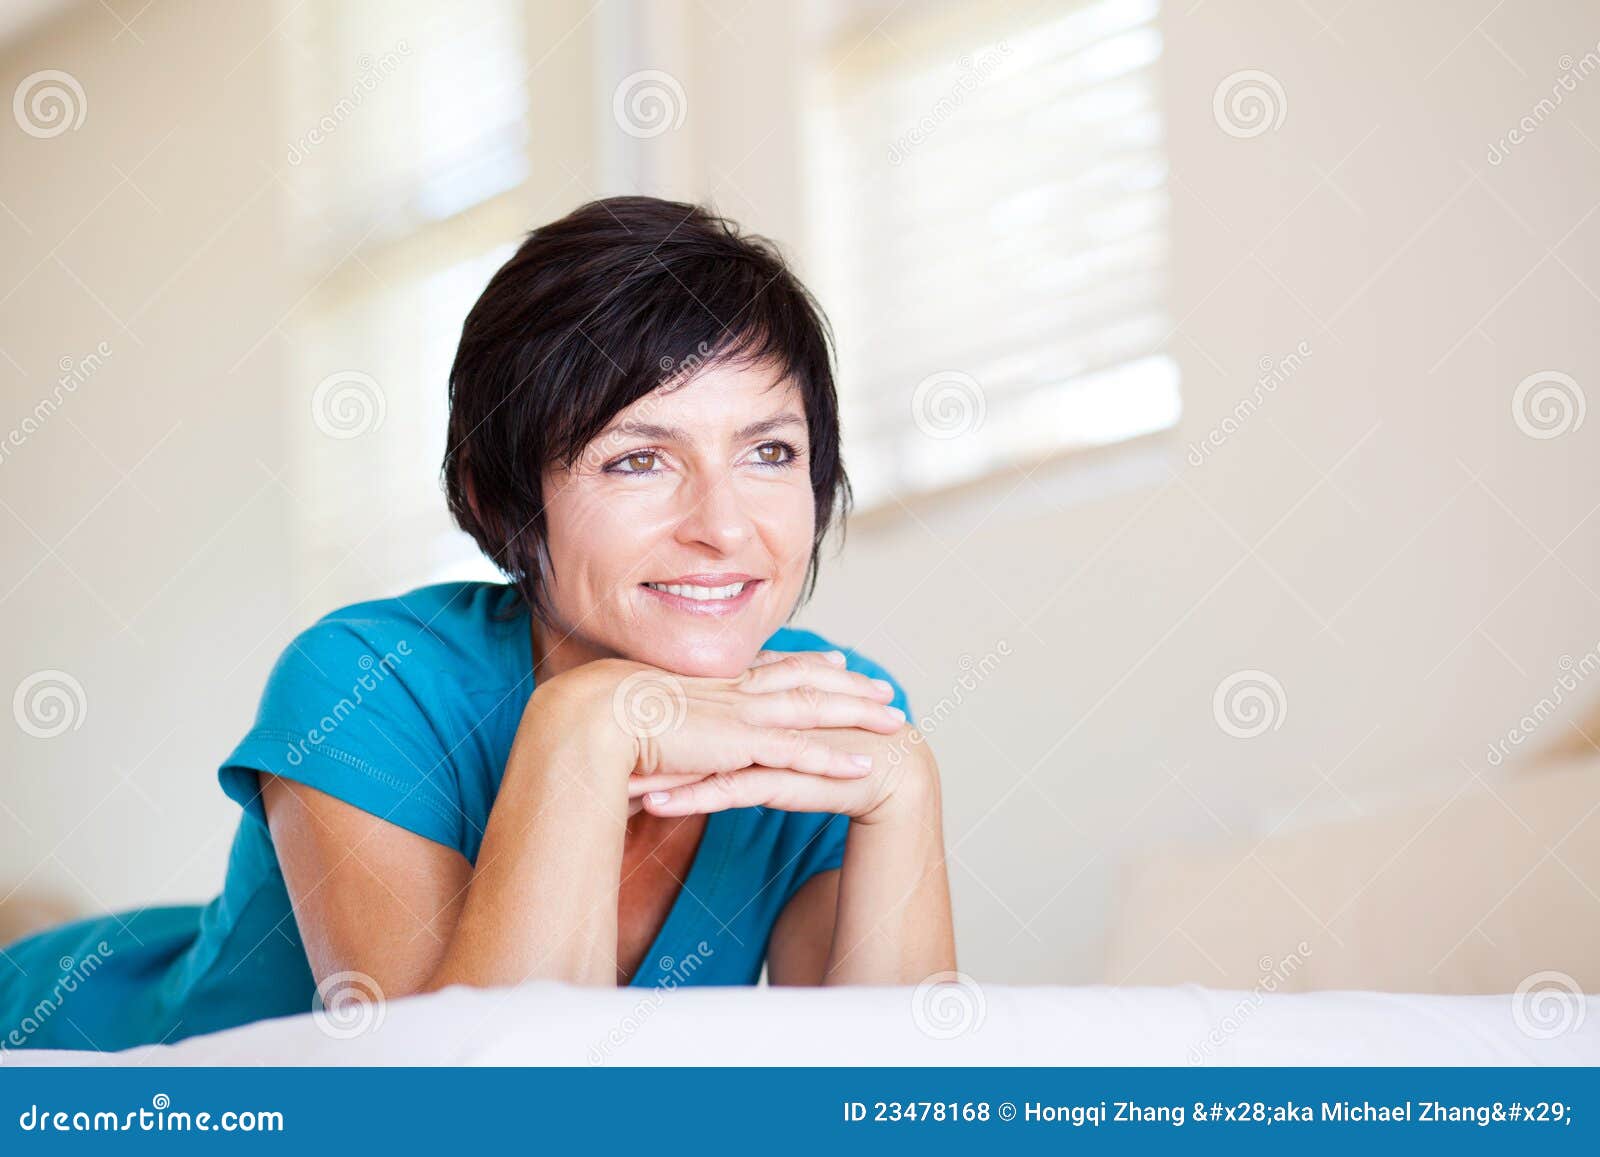 Middle Aged Woman Daydreaming Stock Photo - Image of lying, face: 23478168